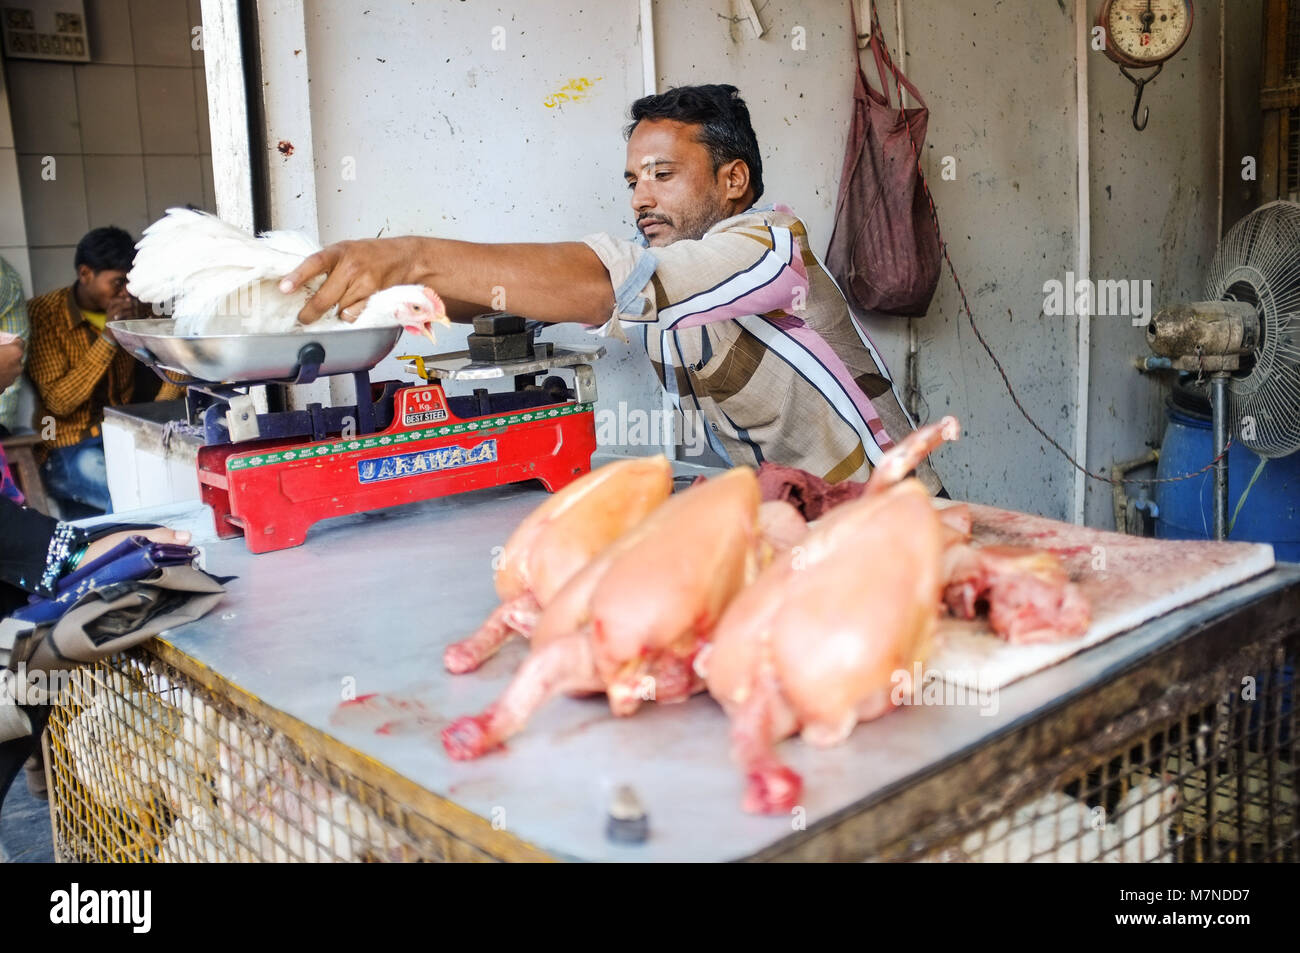 MUMBAI, INDIA - JANUARY 2015: Street salesman weights live chicken on scale at meat stand. Stock Photo